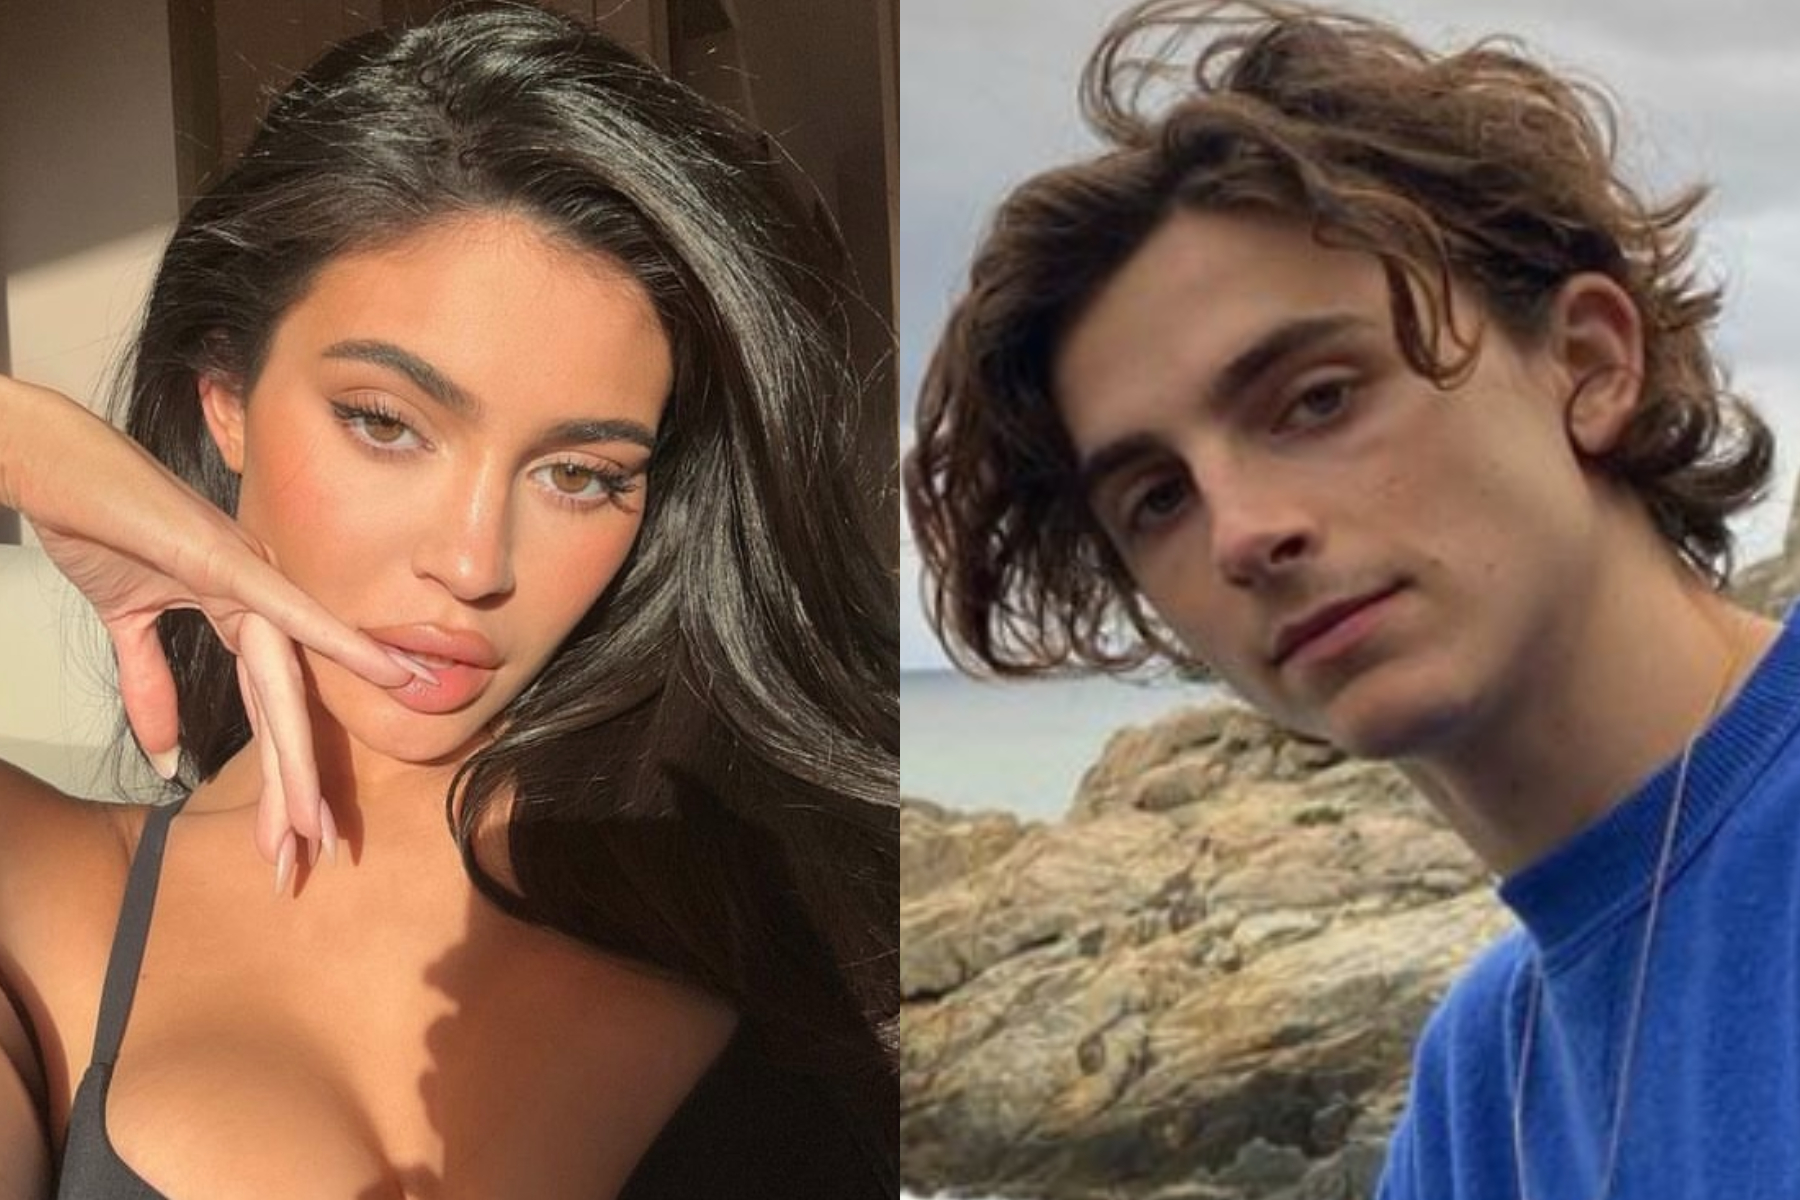 Kylie Jenner and Timothée Chalamet spotted together for the first time